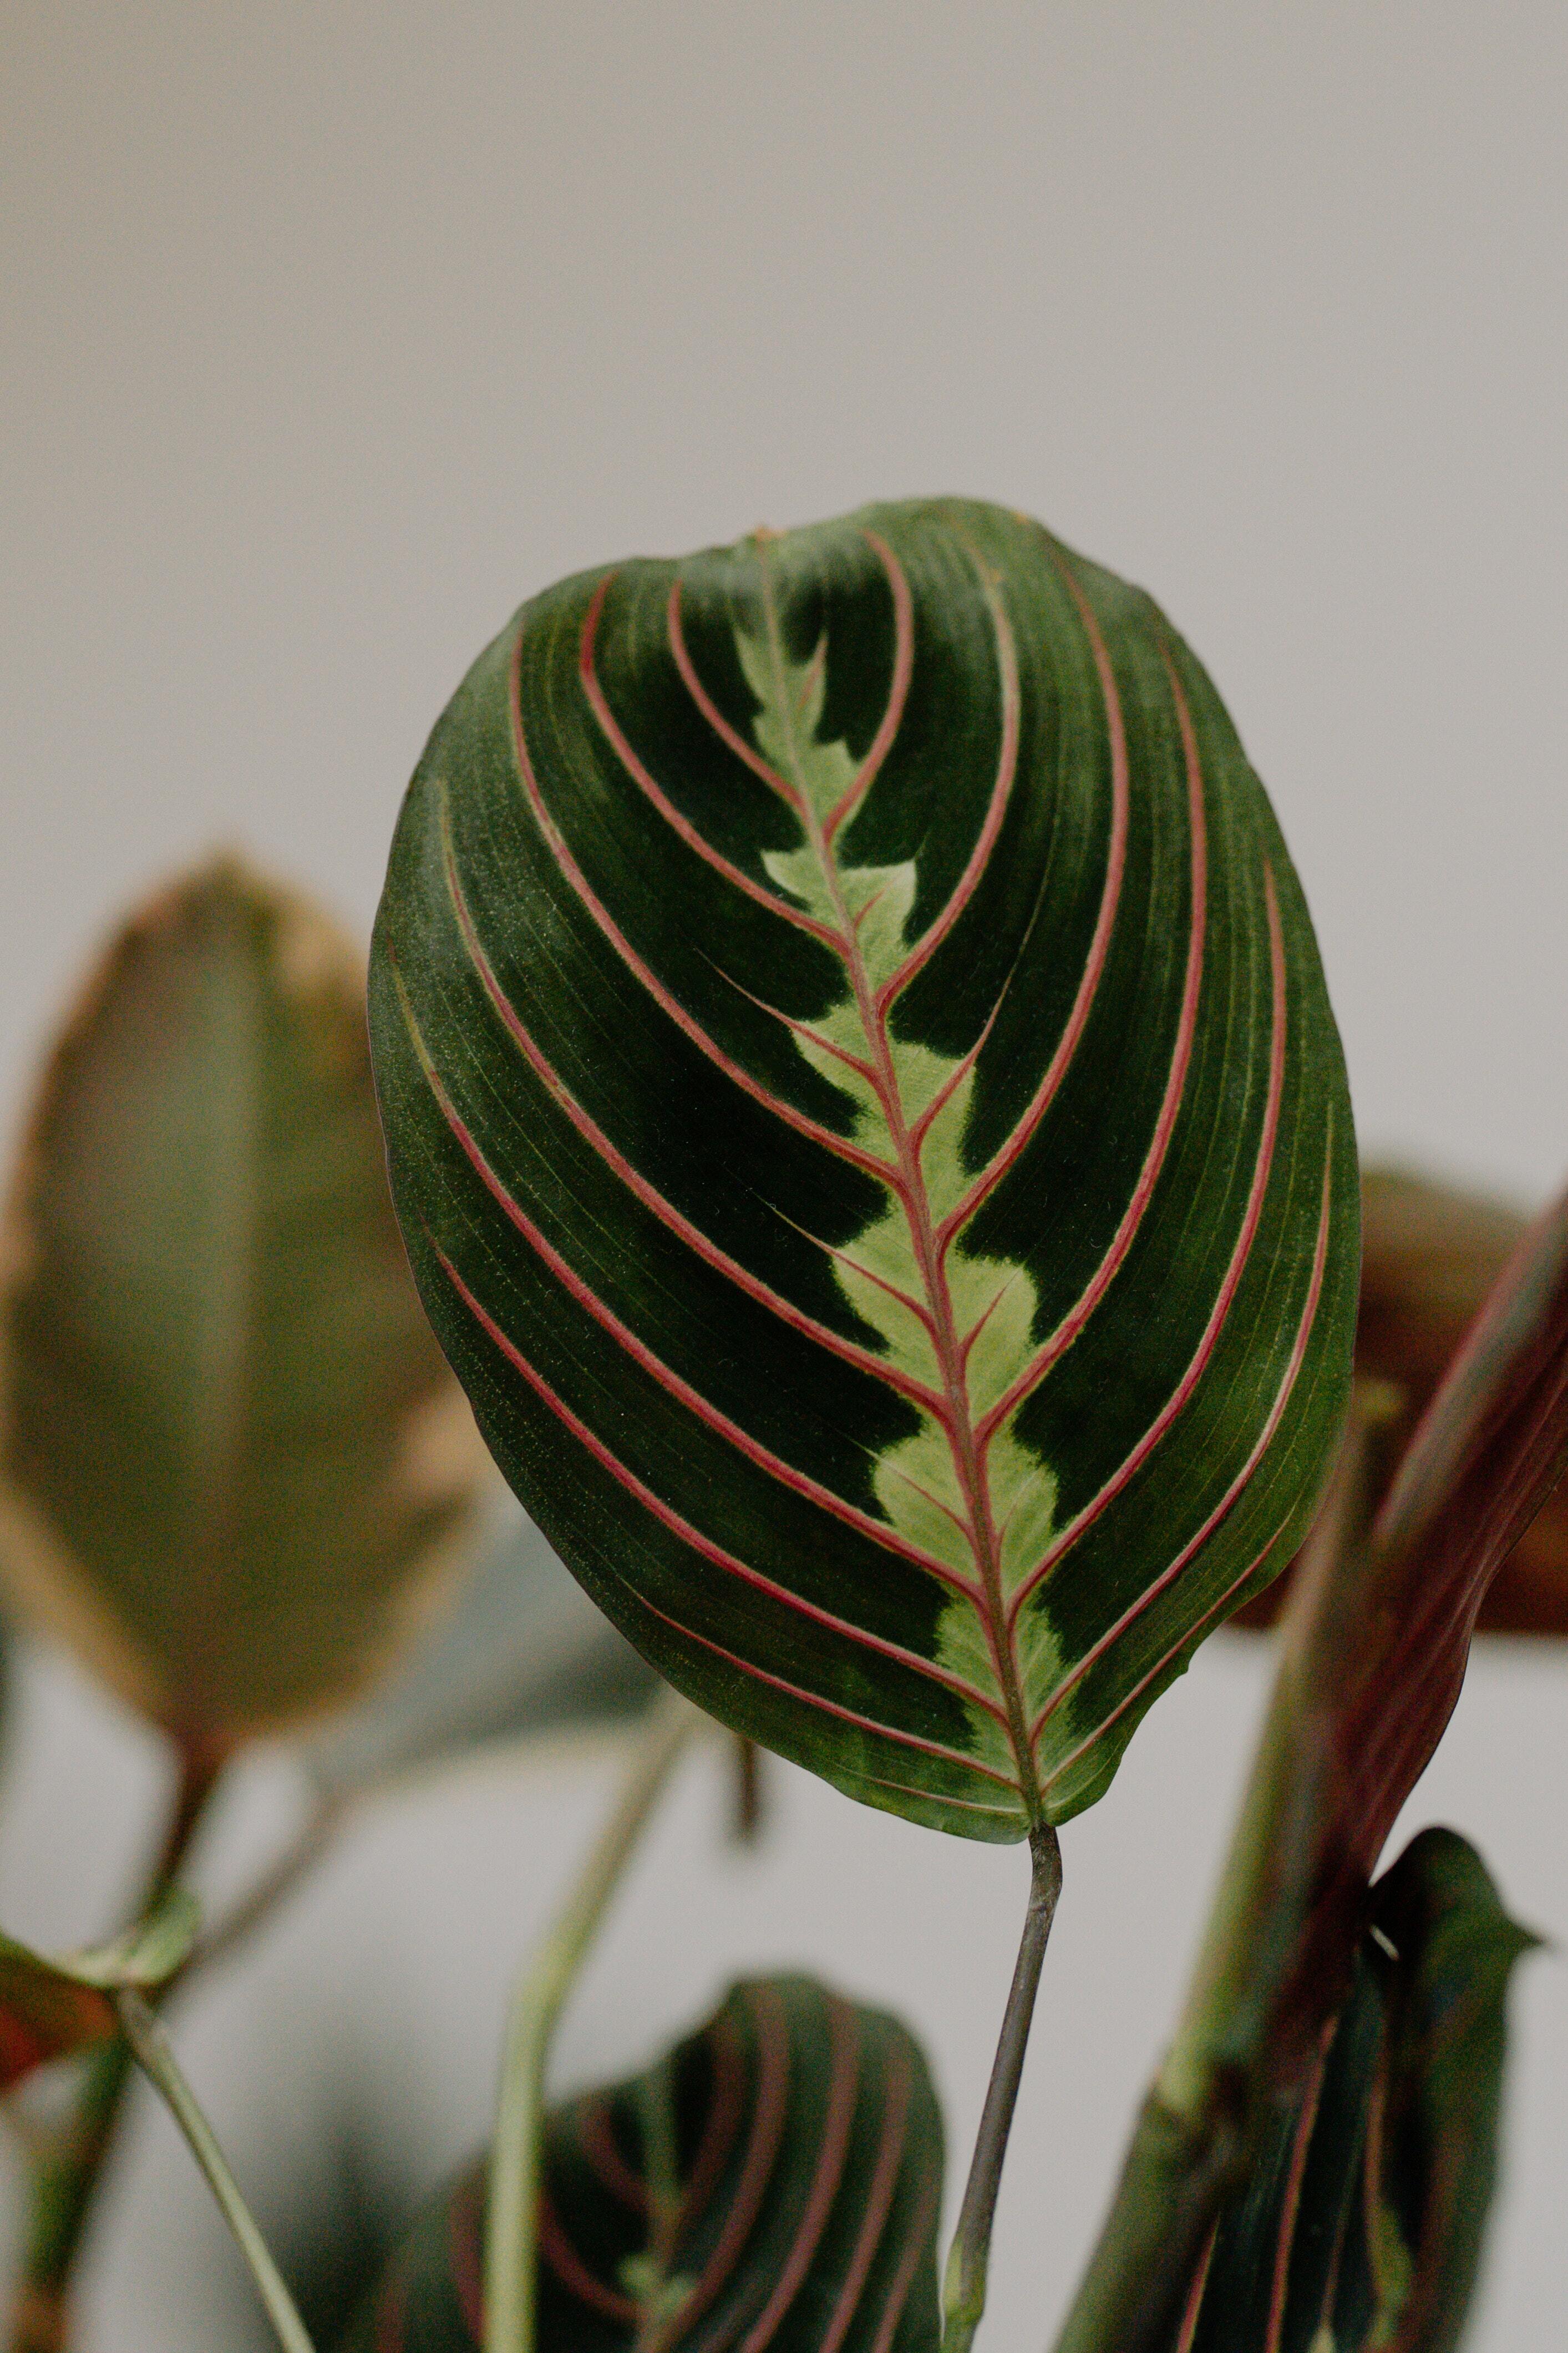 The Prayer Plant is a non-toxic pet-friendly houseplant with oblong green leaves streaked with red veins.